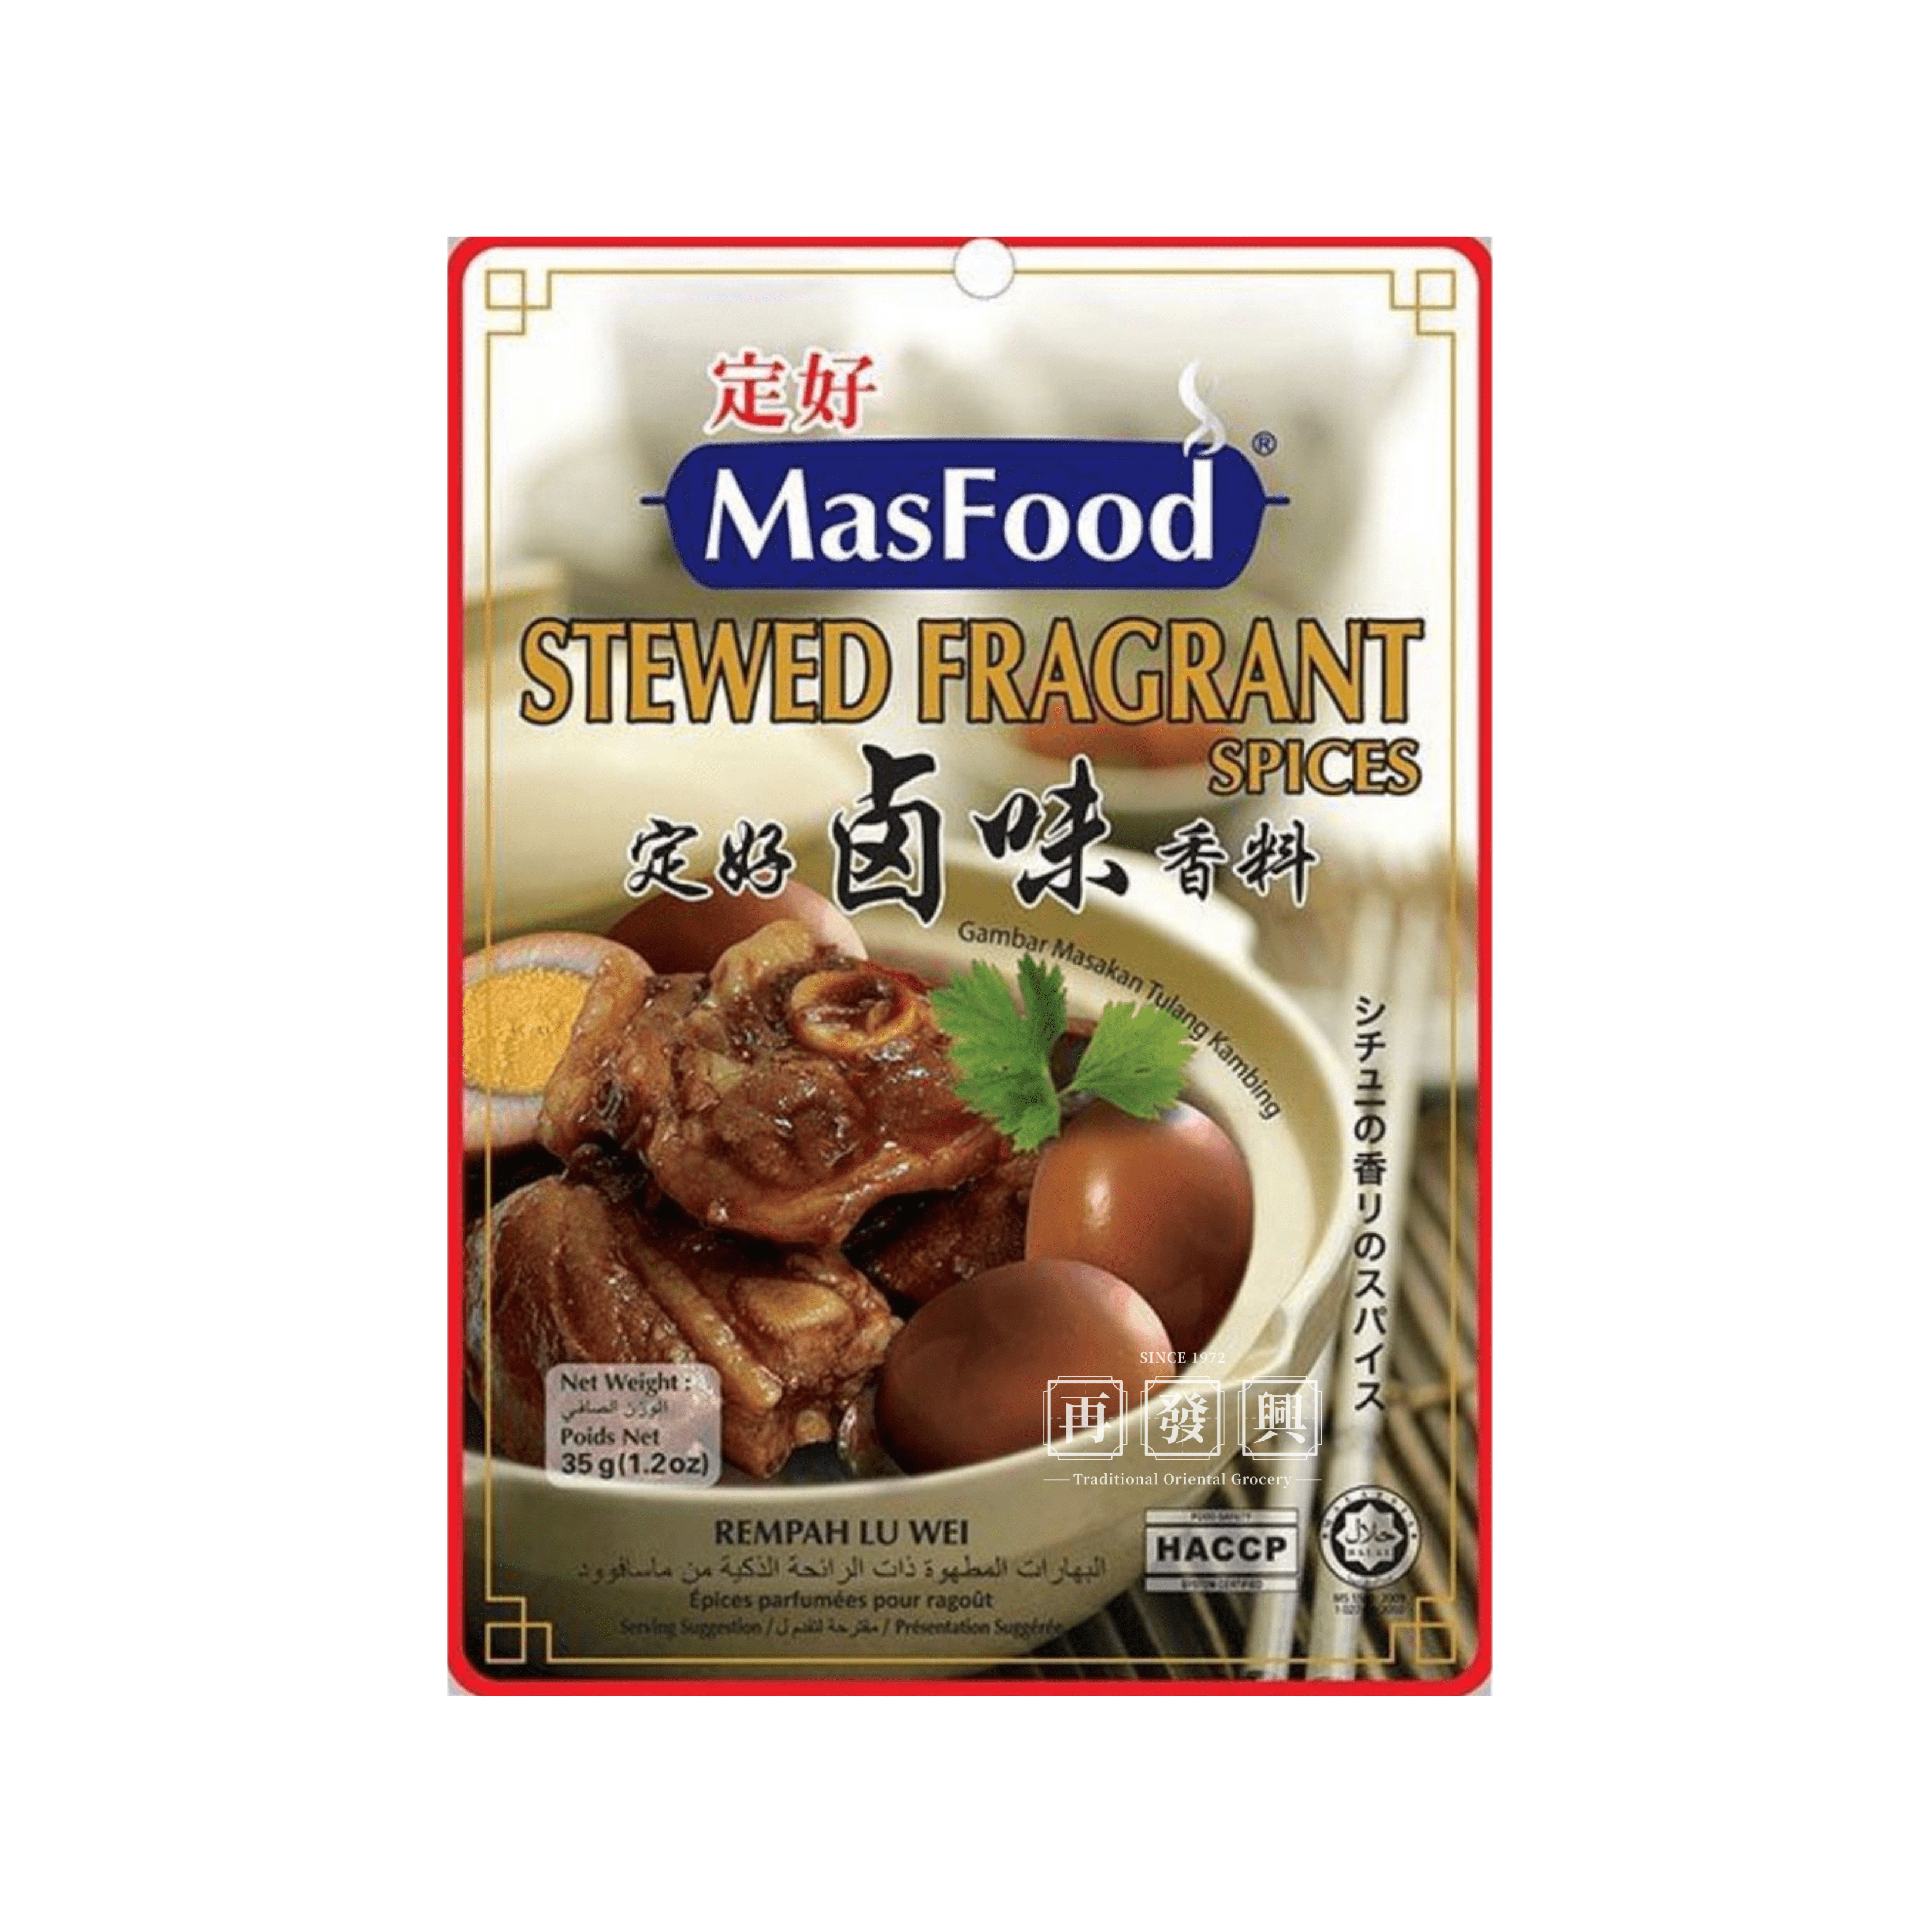 MasFood Stewed Fragrant Spices 35g